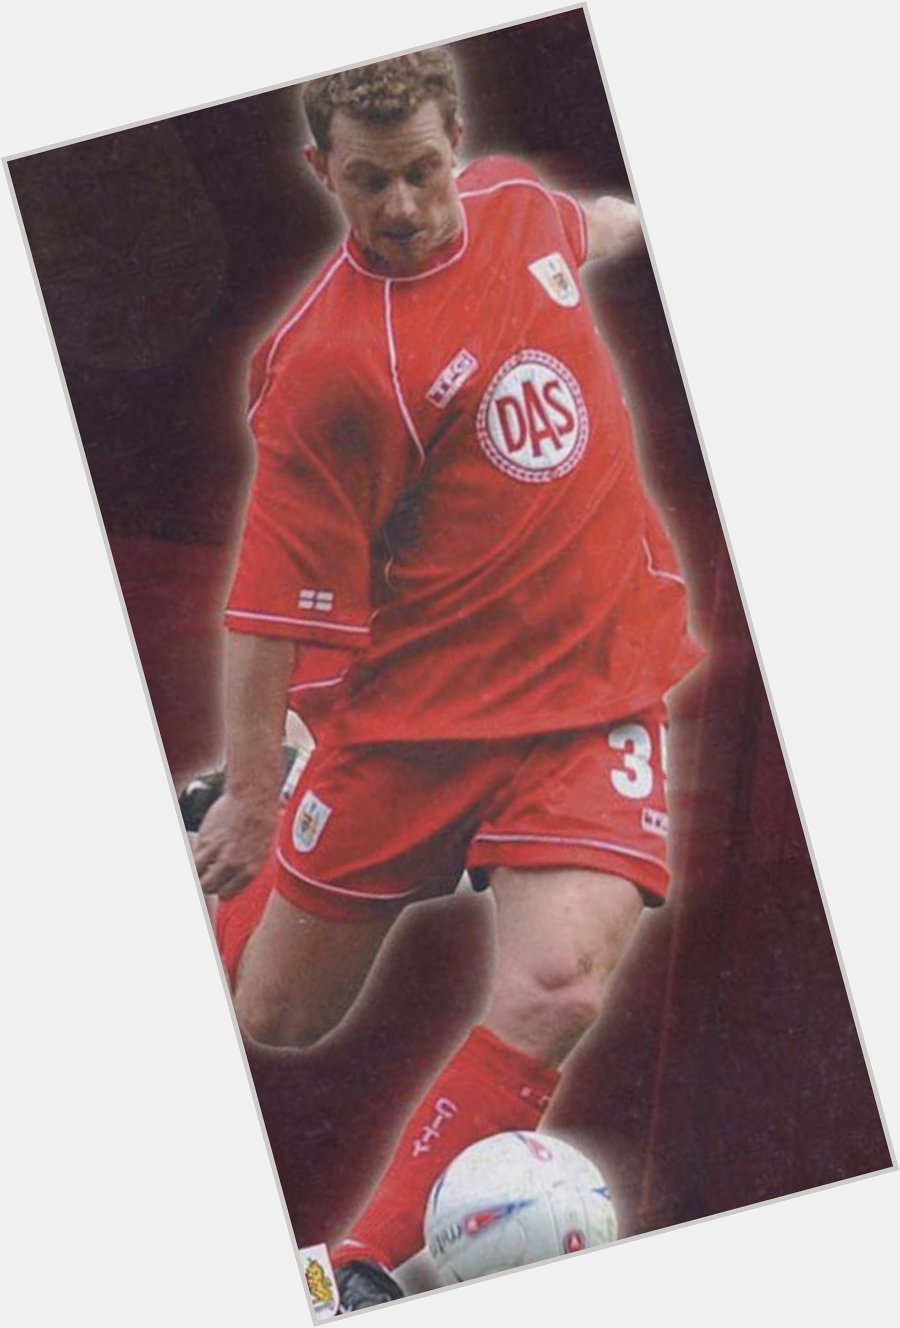 5 goals in 8 loan appearances for Mark Robins at Bristol City - Happy Birthday Mark 